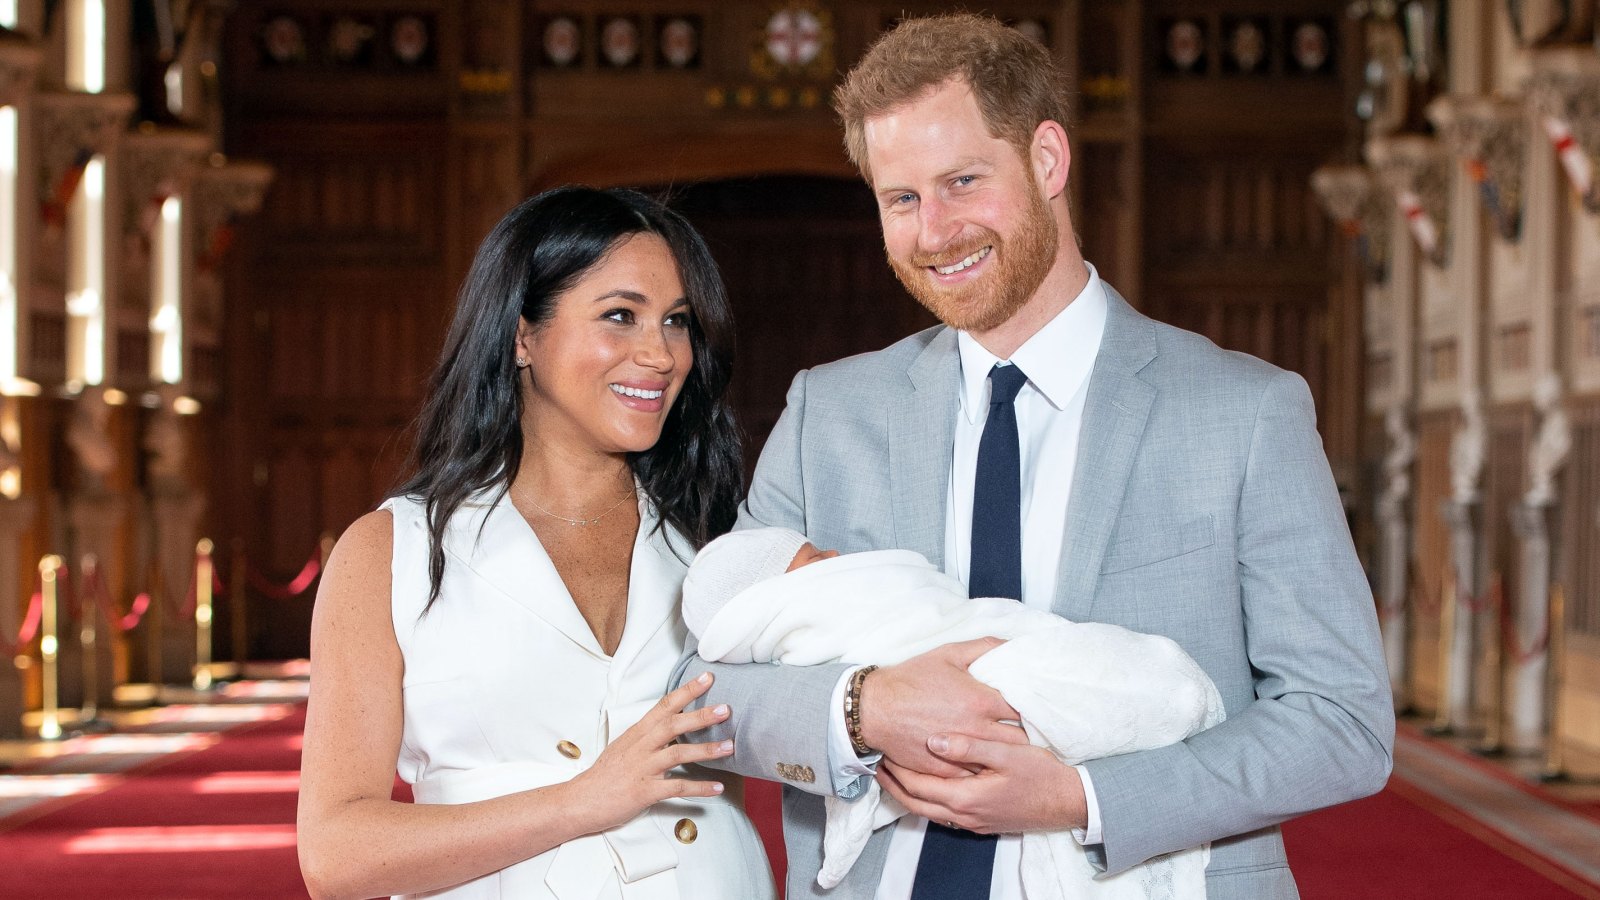 Duchess Meghan Shares Sweet Mother's Day Tribute With Photo of Baby Archie